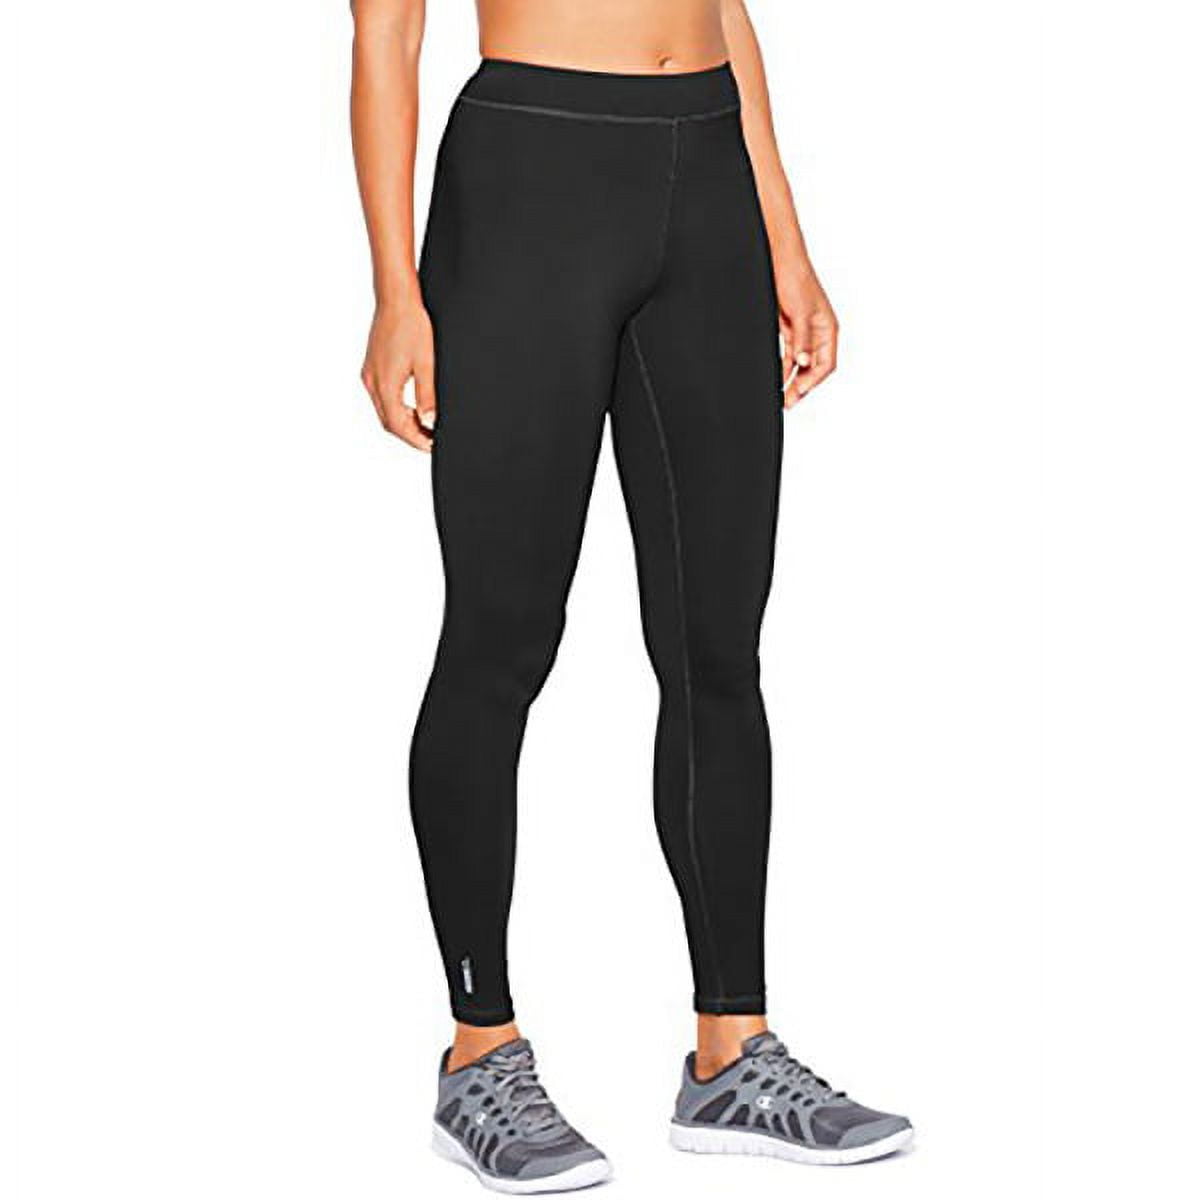 Duofold Activewear for Women